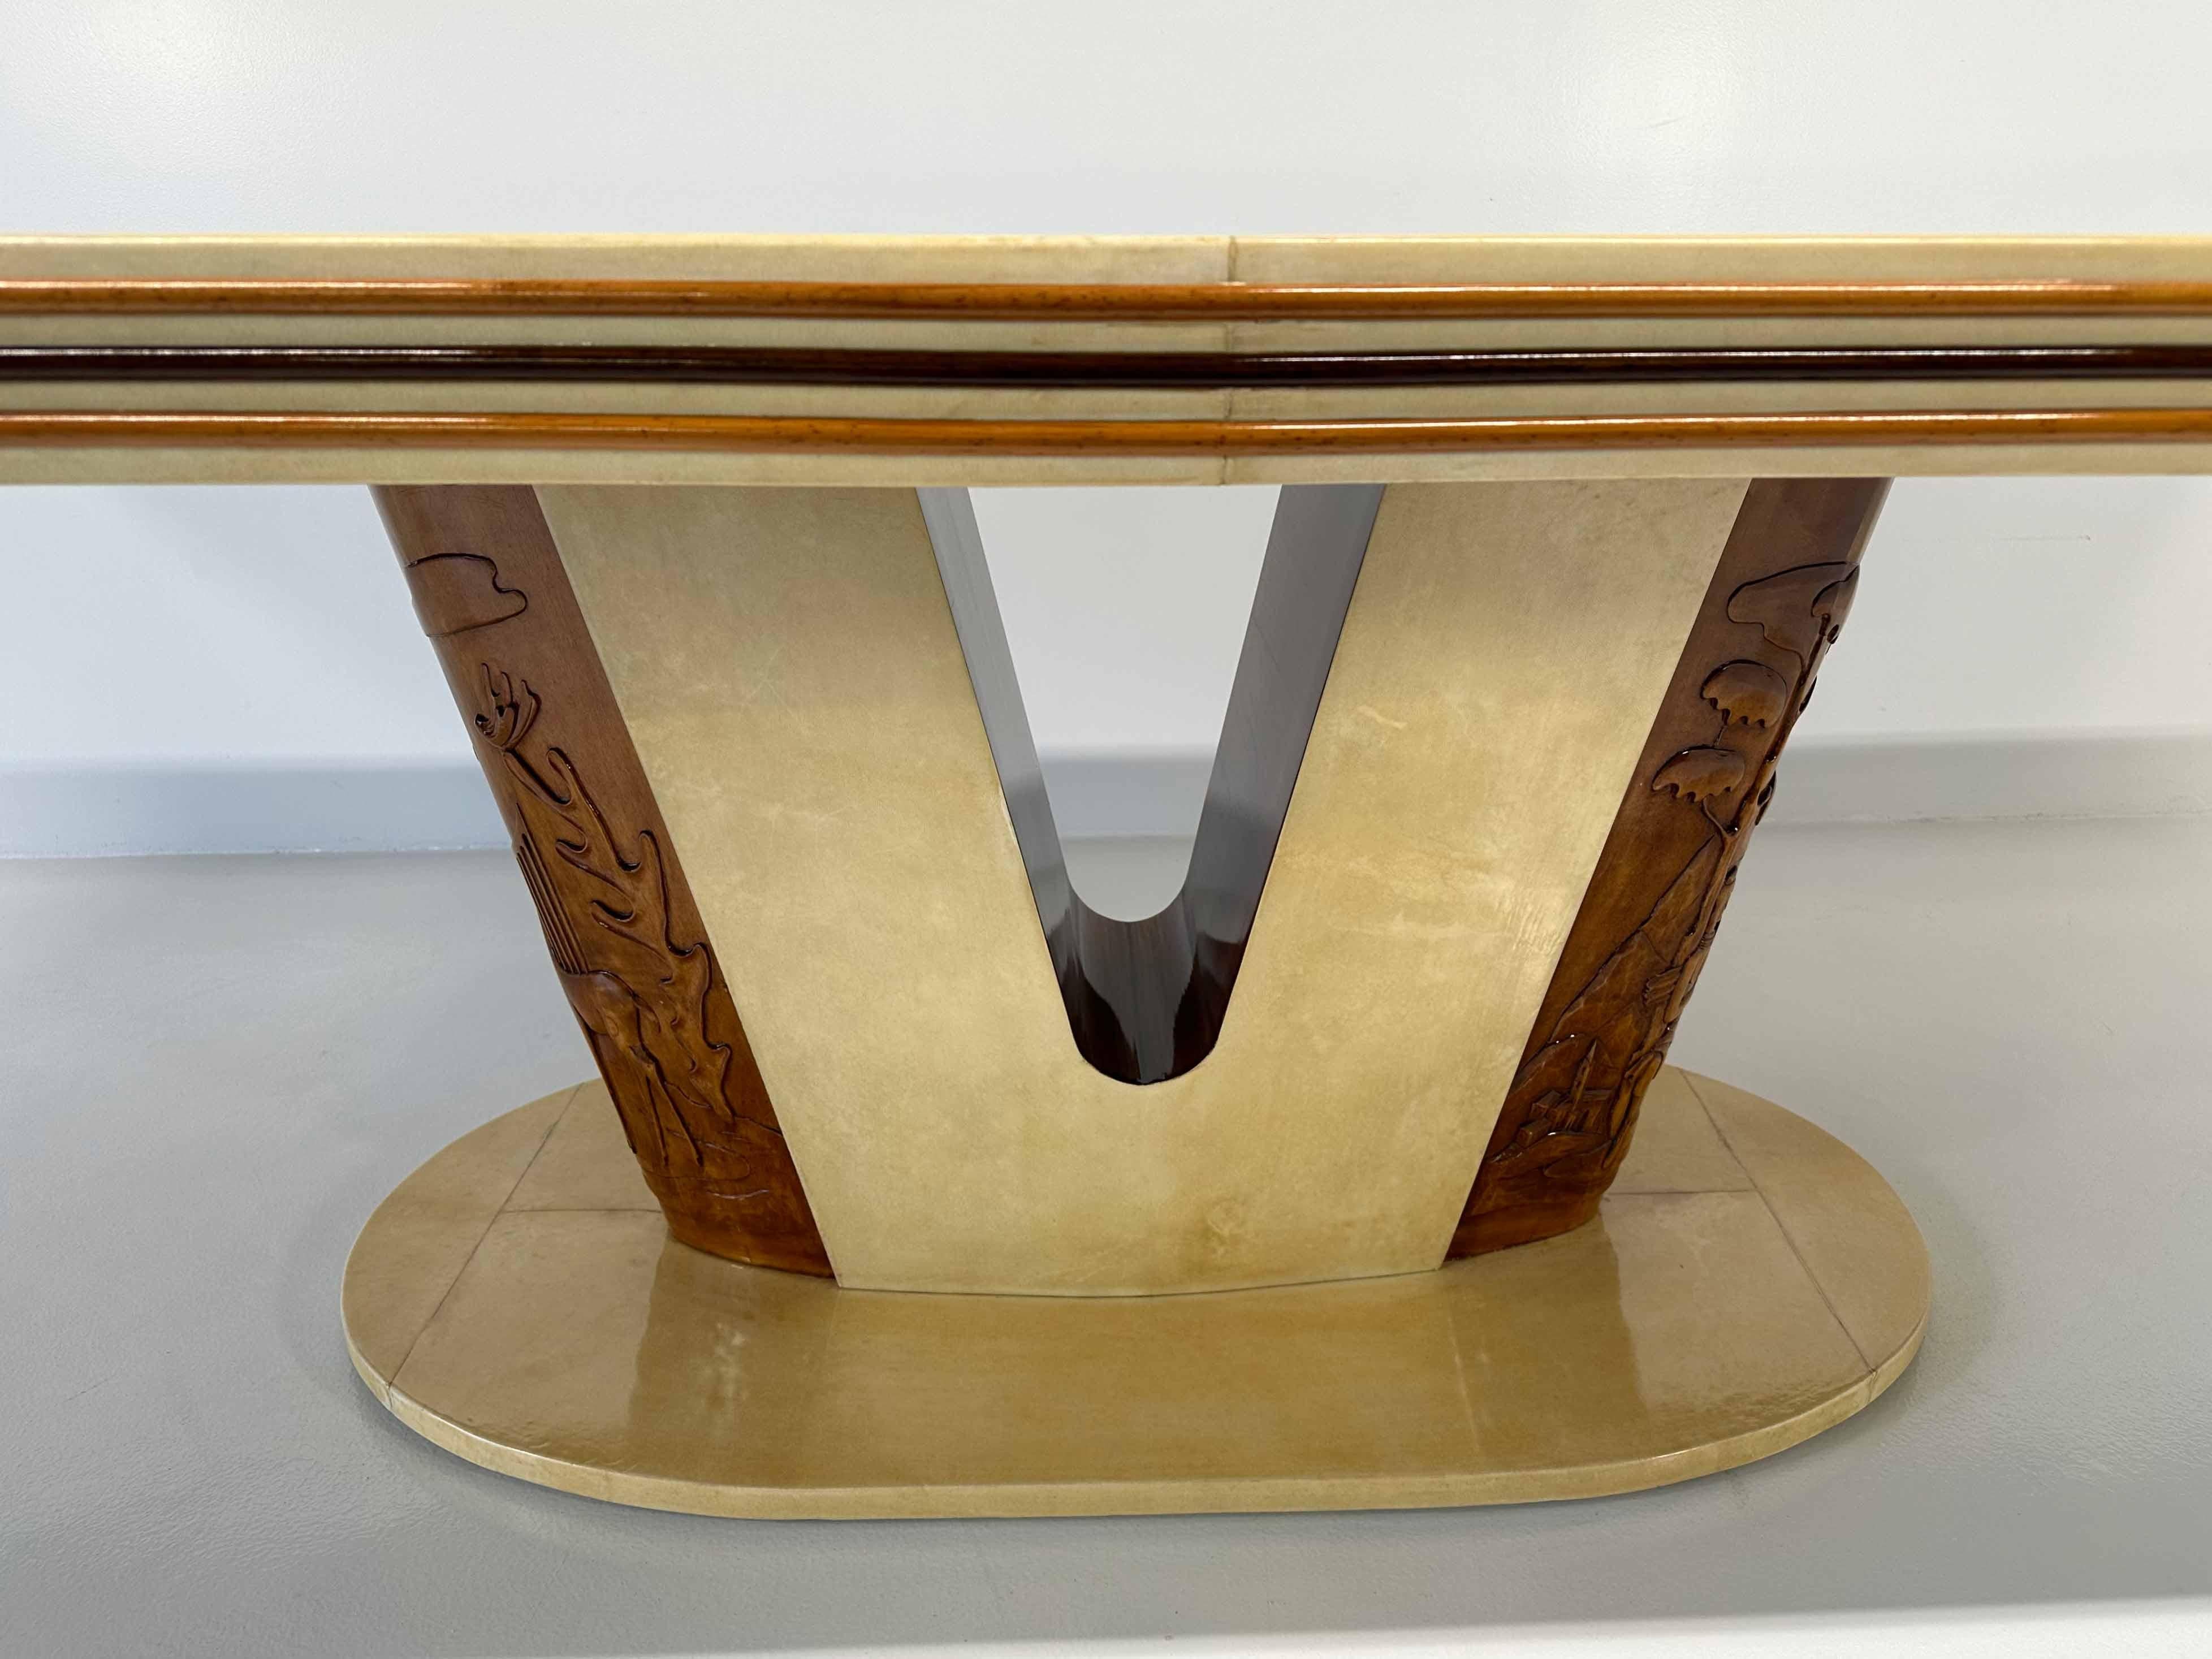 Italian Art Deco Parchment and Carved Maple Table, 1930s For Sale 3